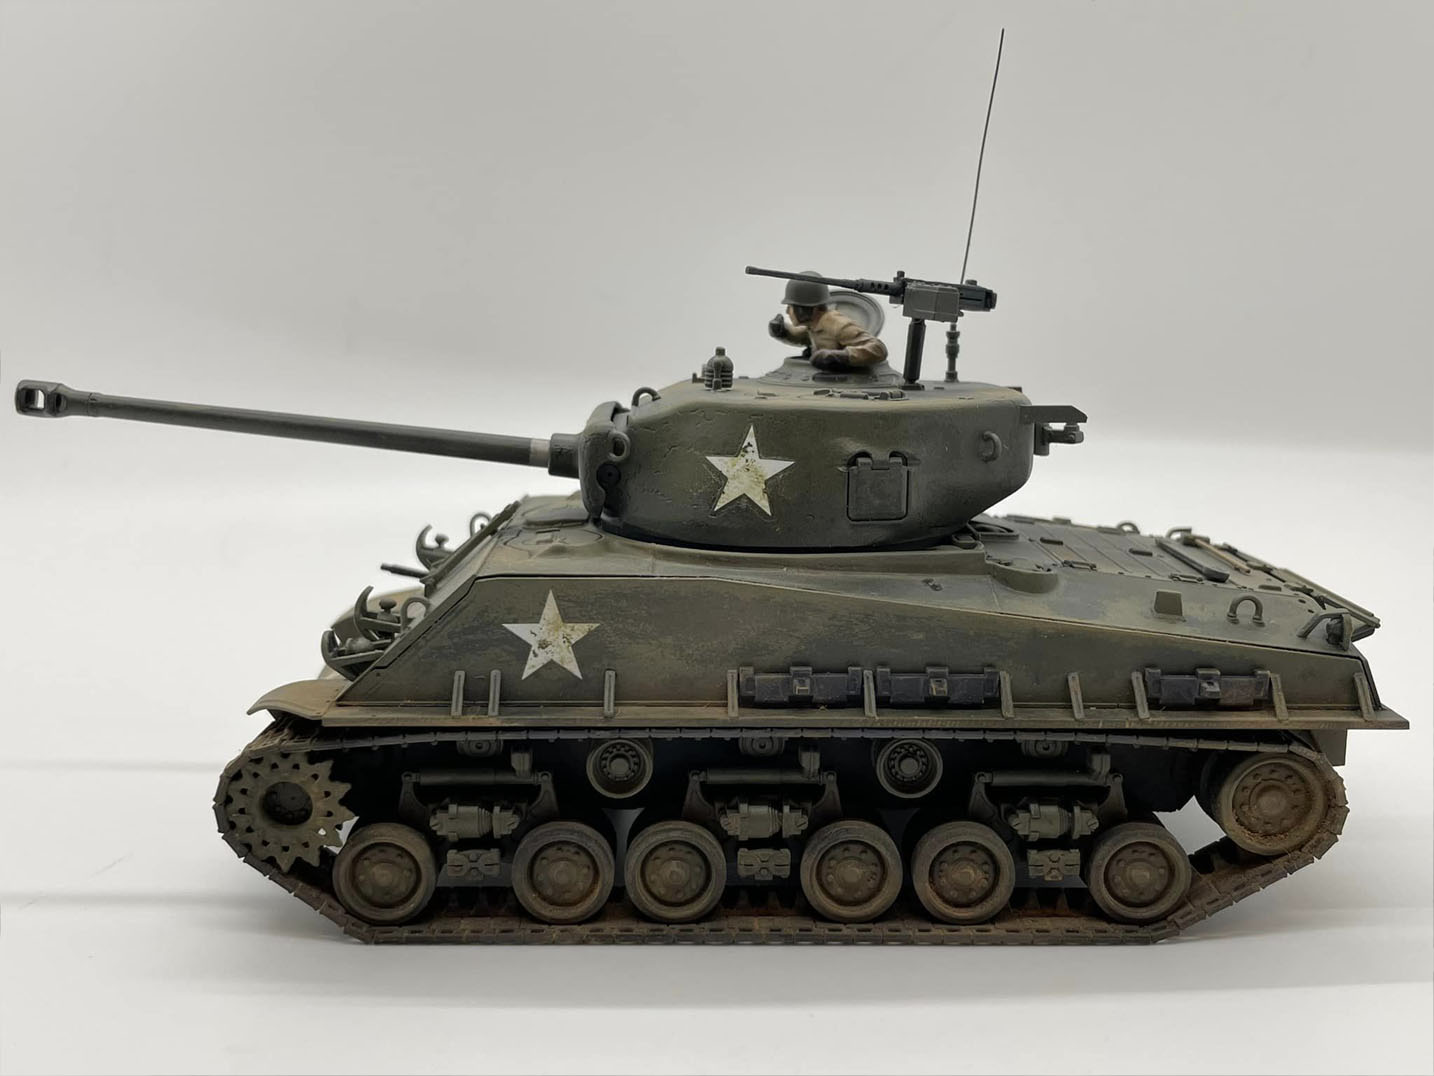 M4A3E8 Sherman “Easy Eight”, 5th Armored Division, Germany, April 1945 (Tamiya 1/48)
